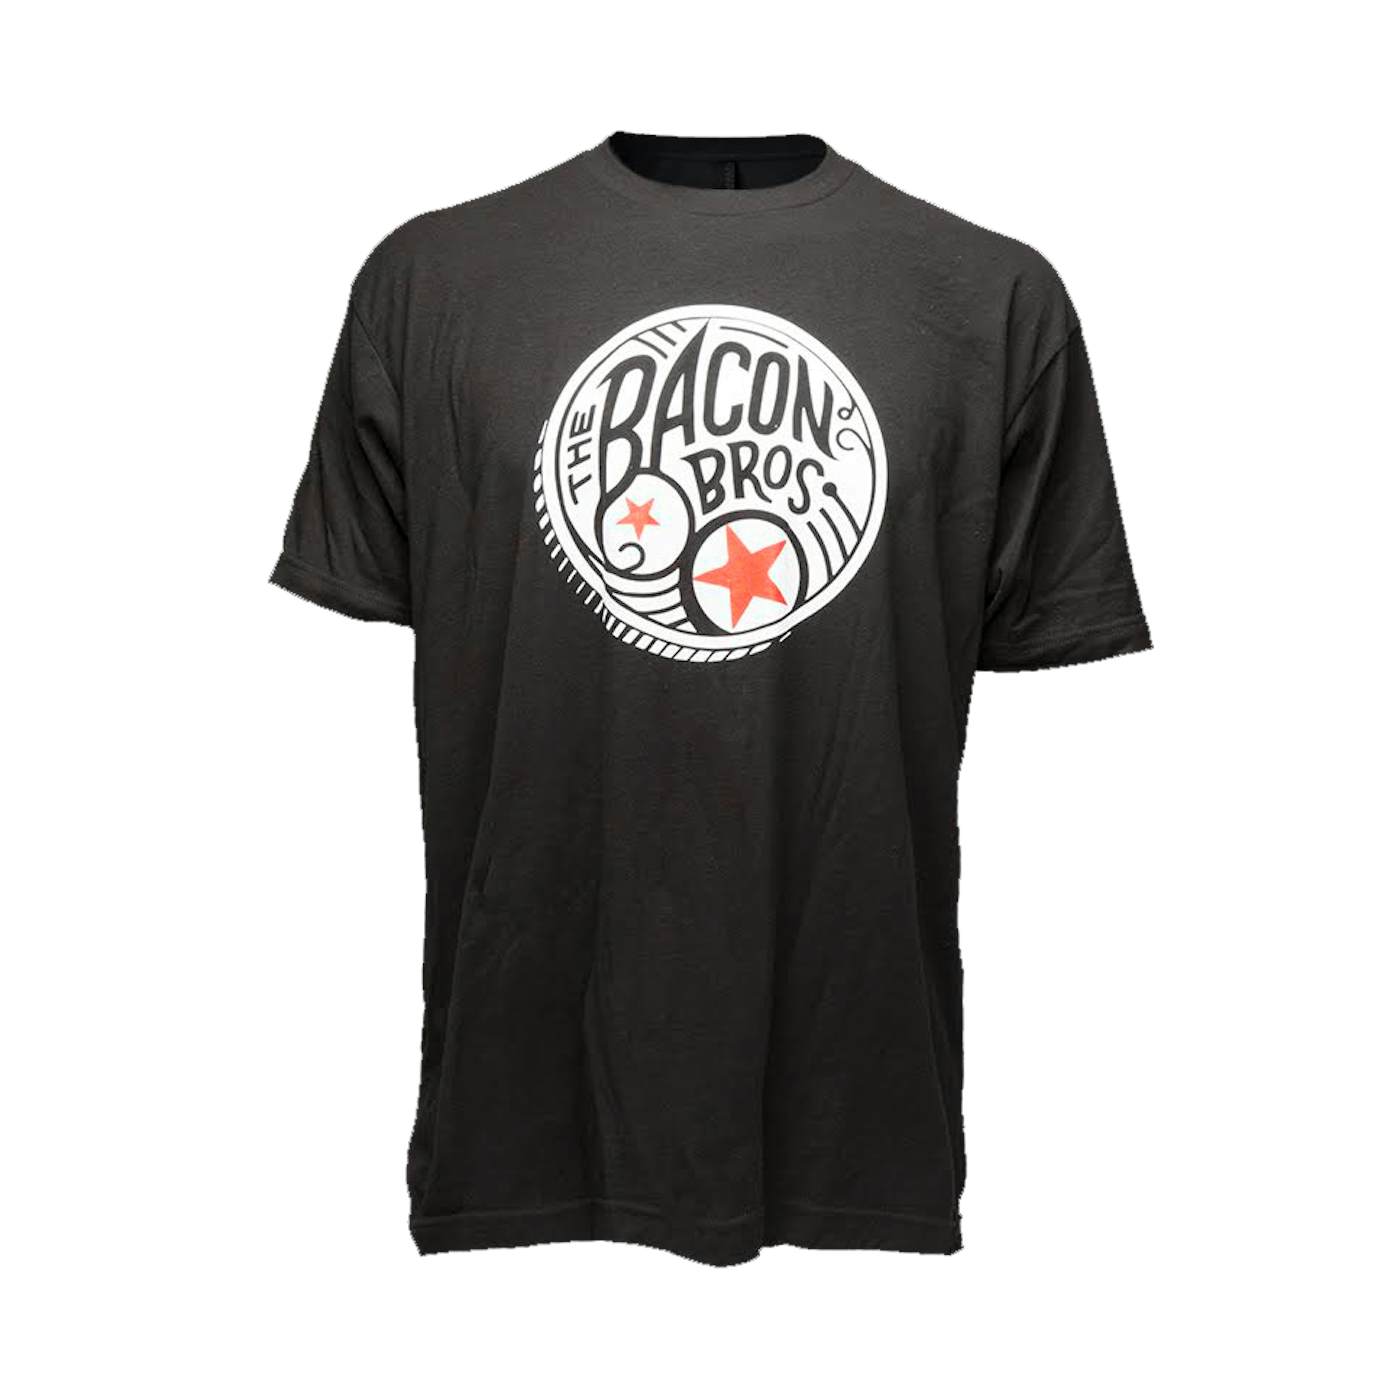 The Bacon Brothers Black Drum Logo Tee